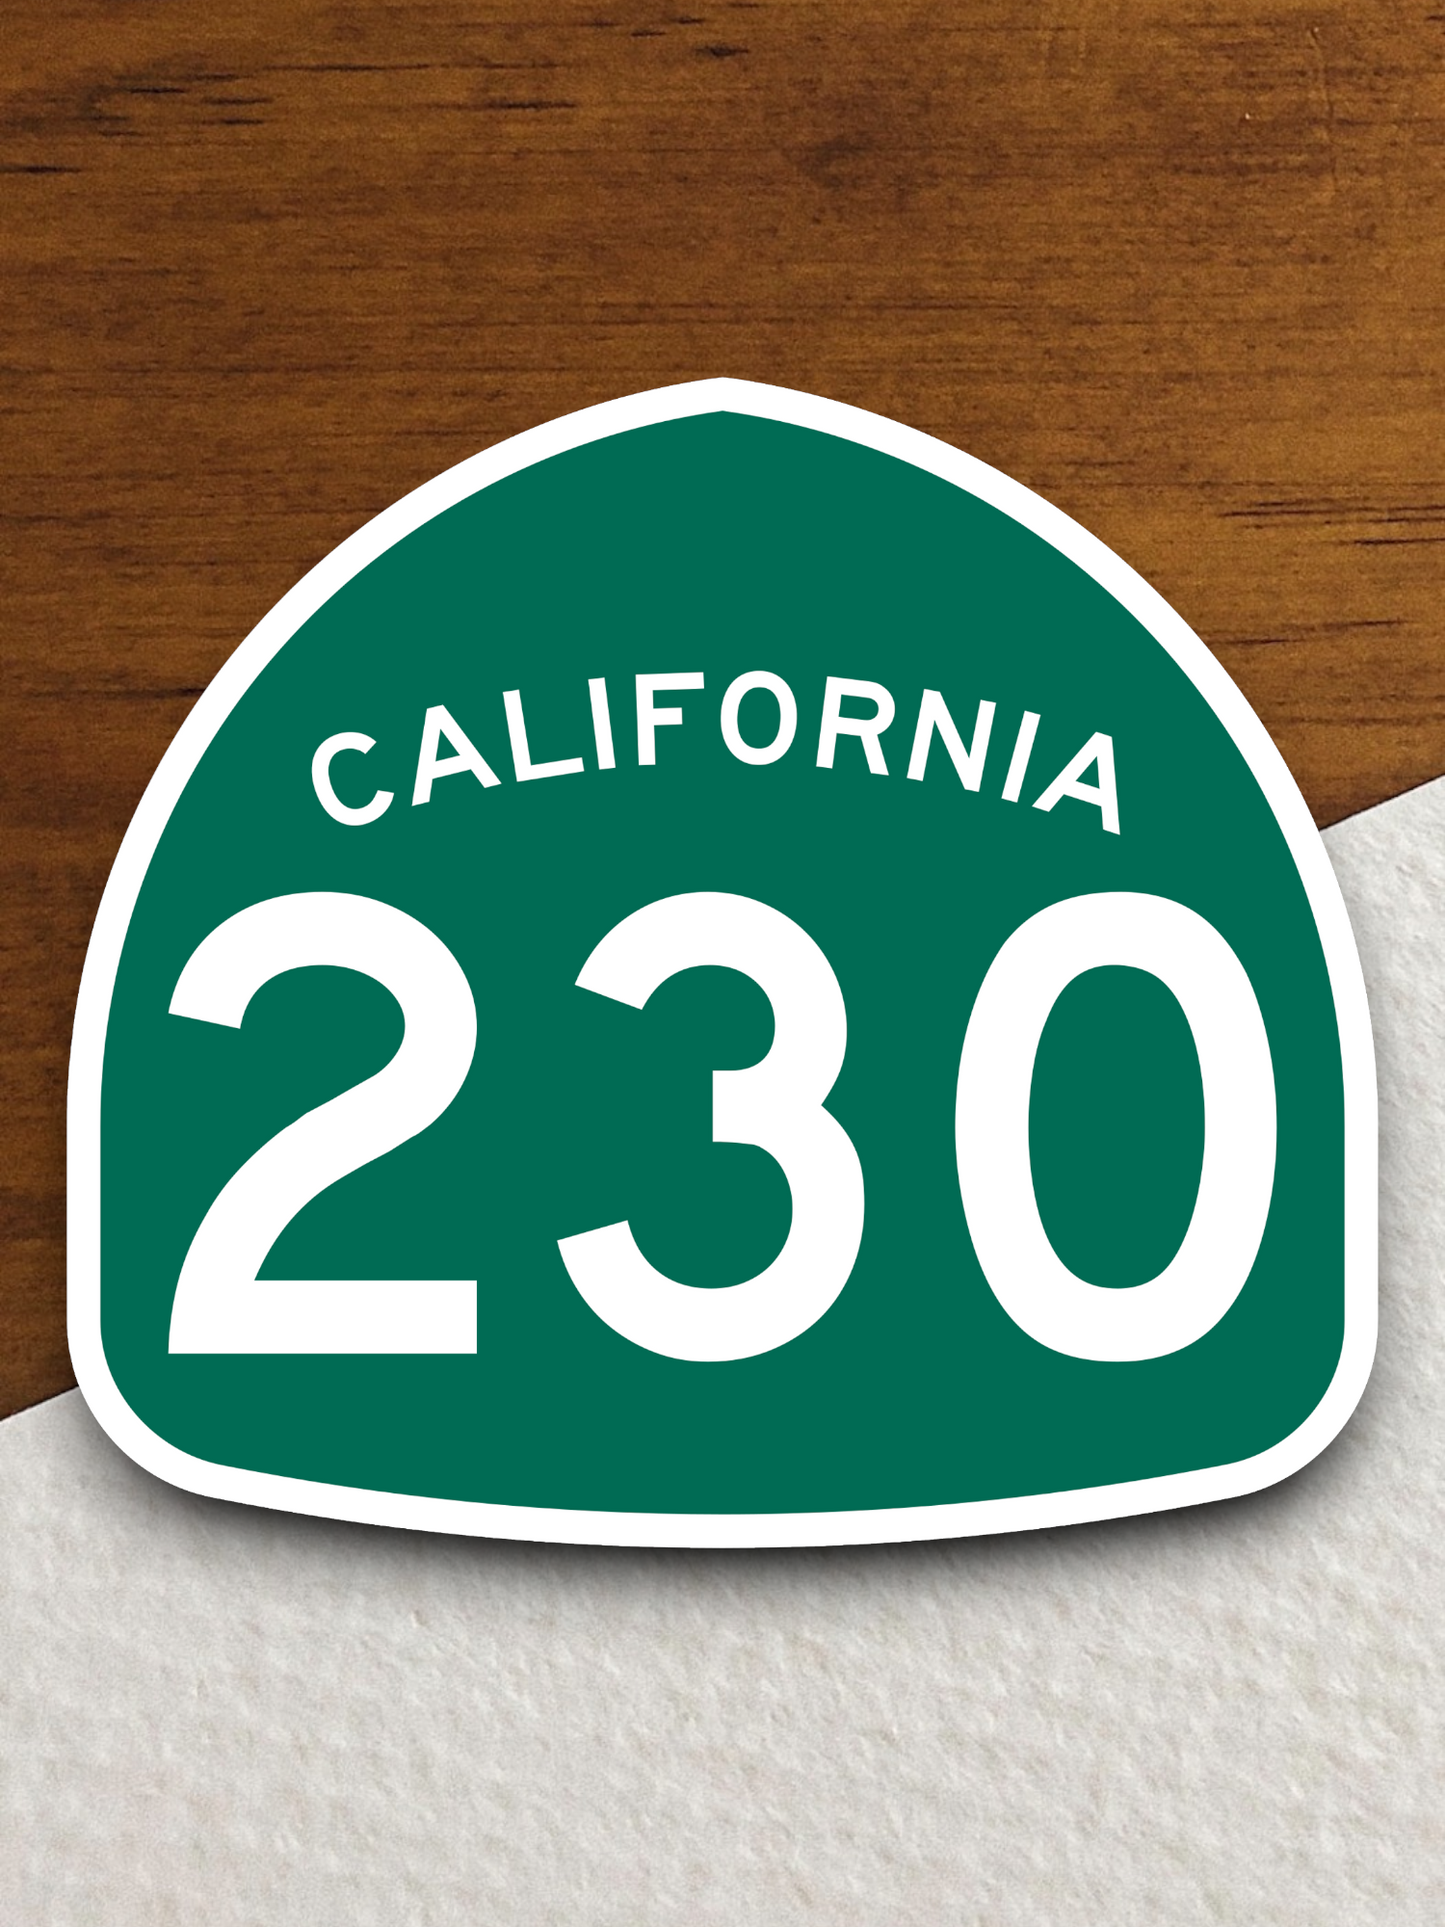 California State Route 230 Road Sign Sticker